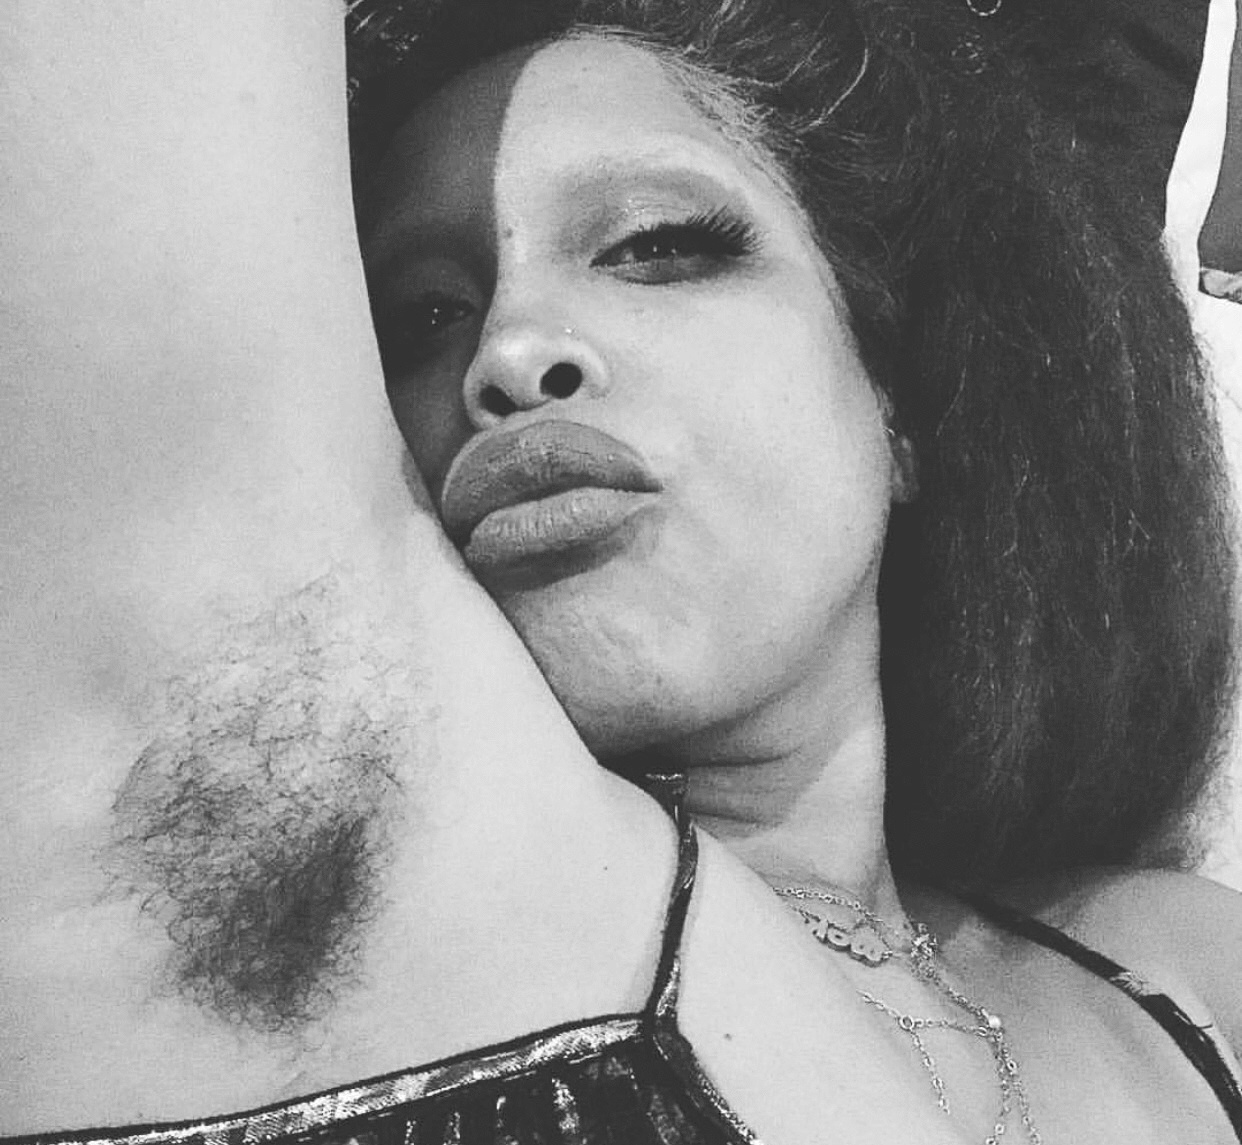 Team No Shave: Erykah Badu & Her Armpit Hair Is A Revolution For Wh...